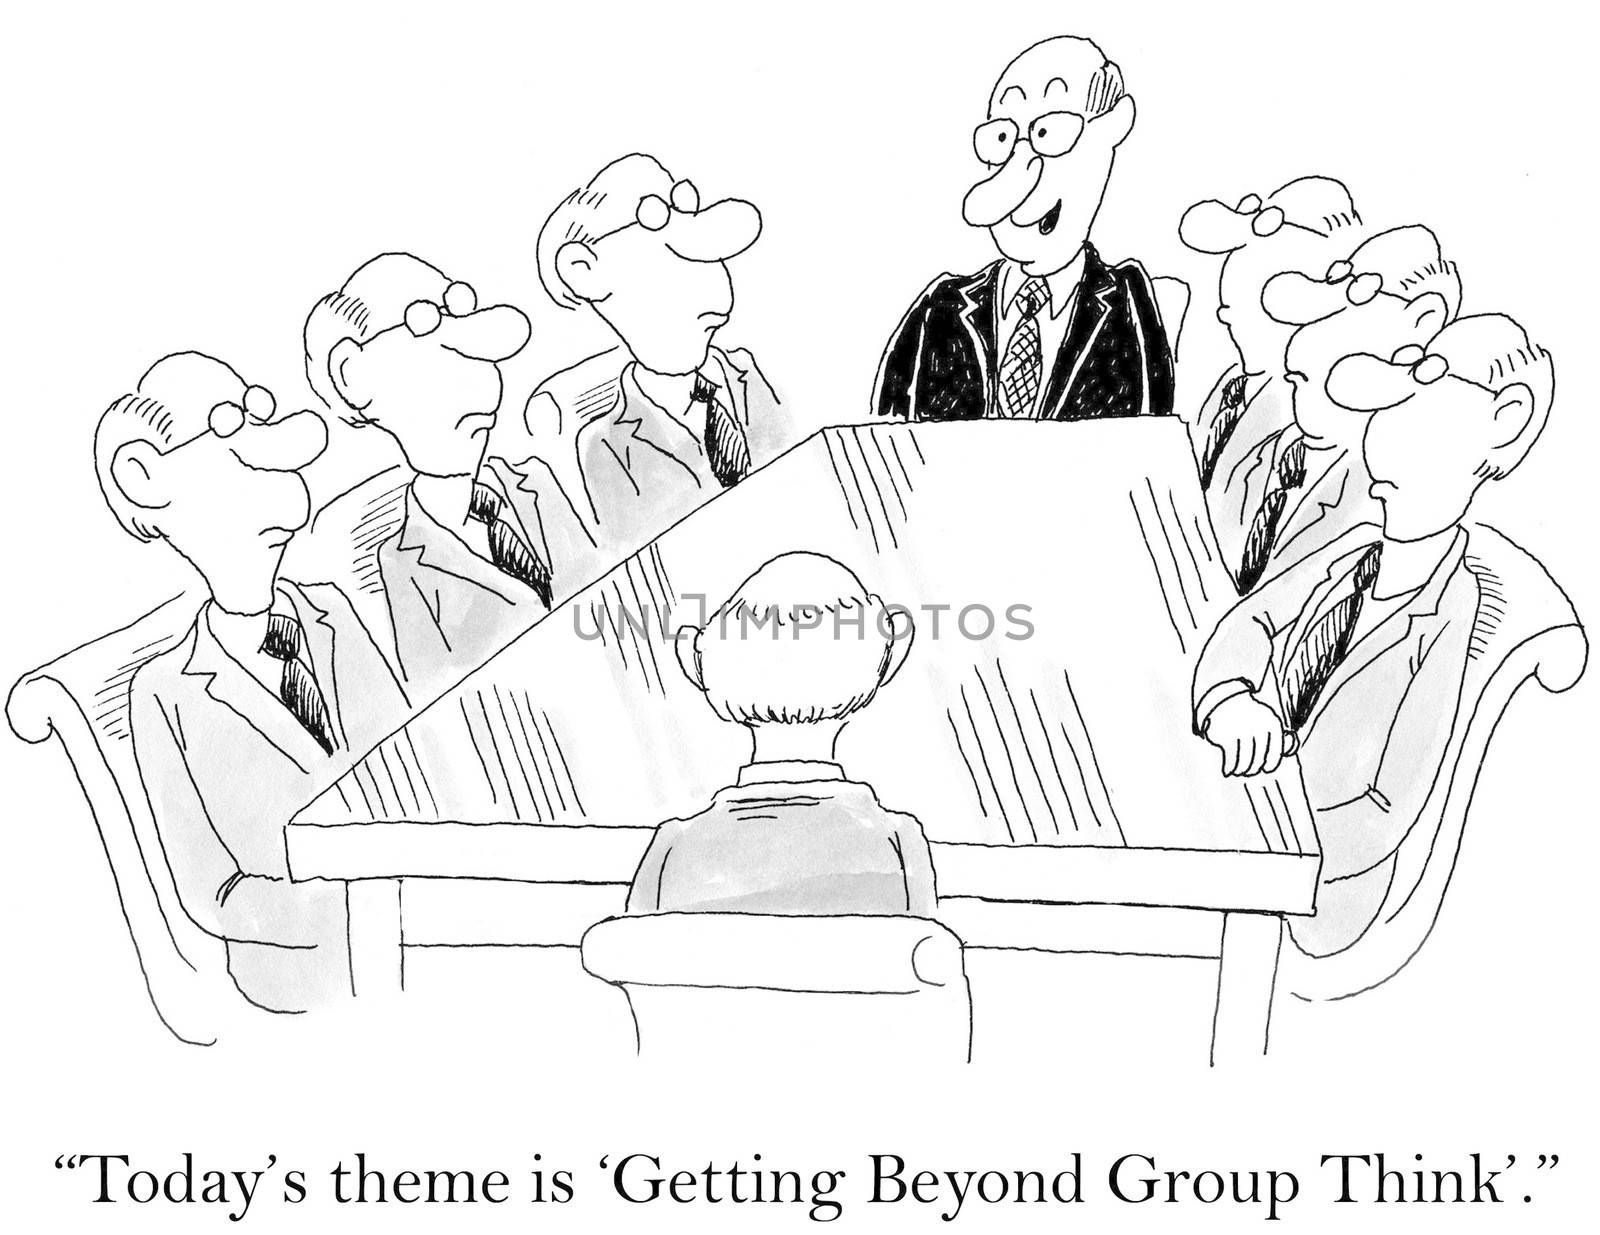 "Today's theme is 'Getting Beyond Group Think'."